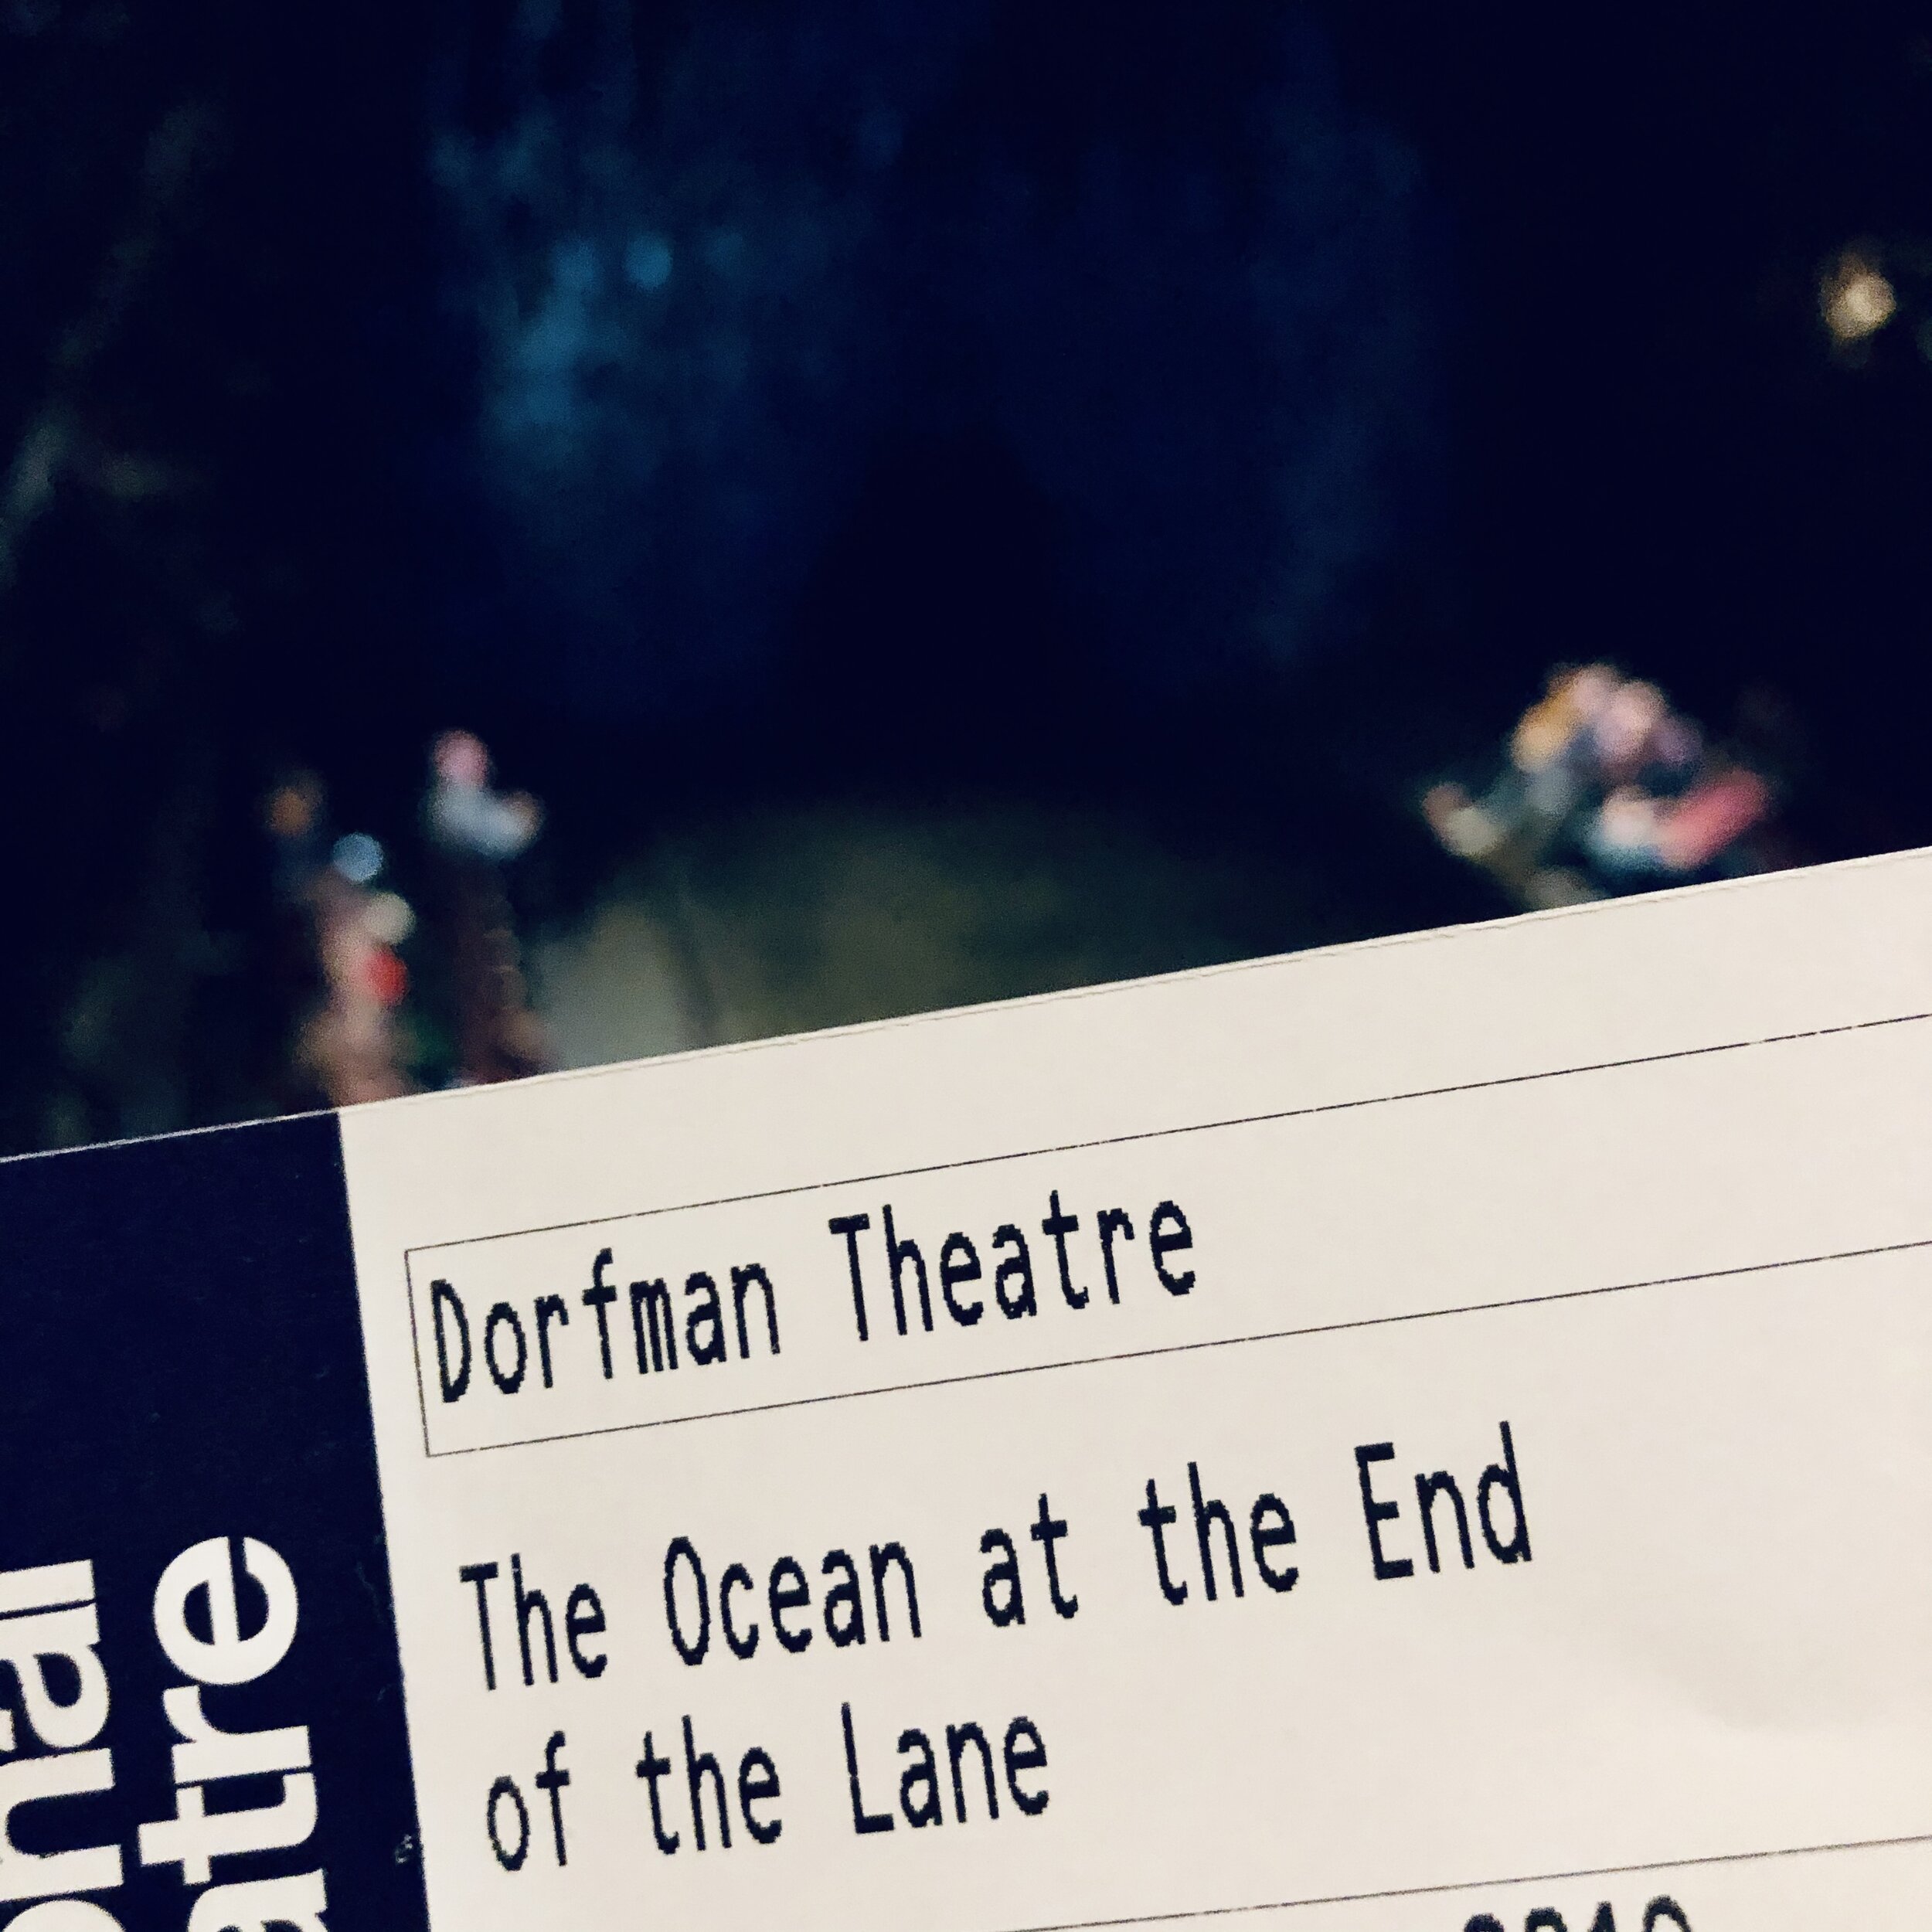 The Ocean at the End of the Lane at the National Theatre